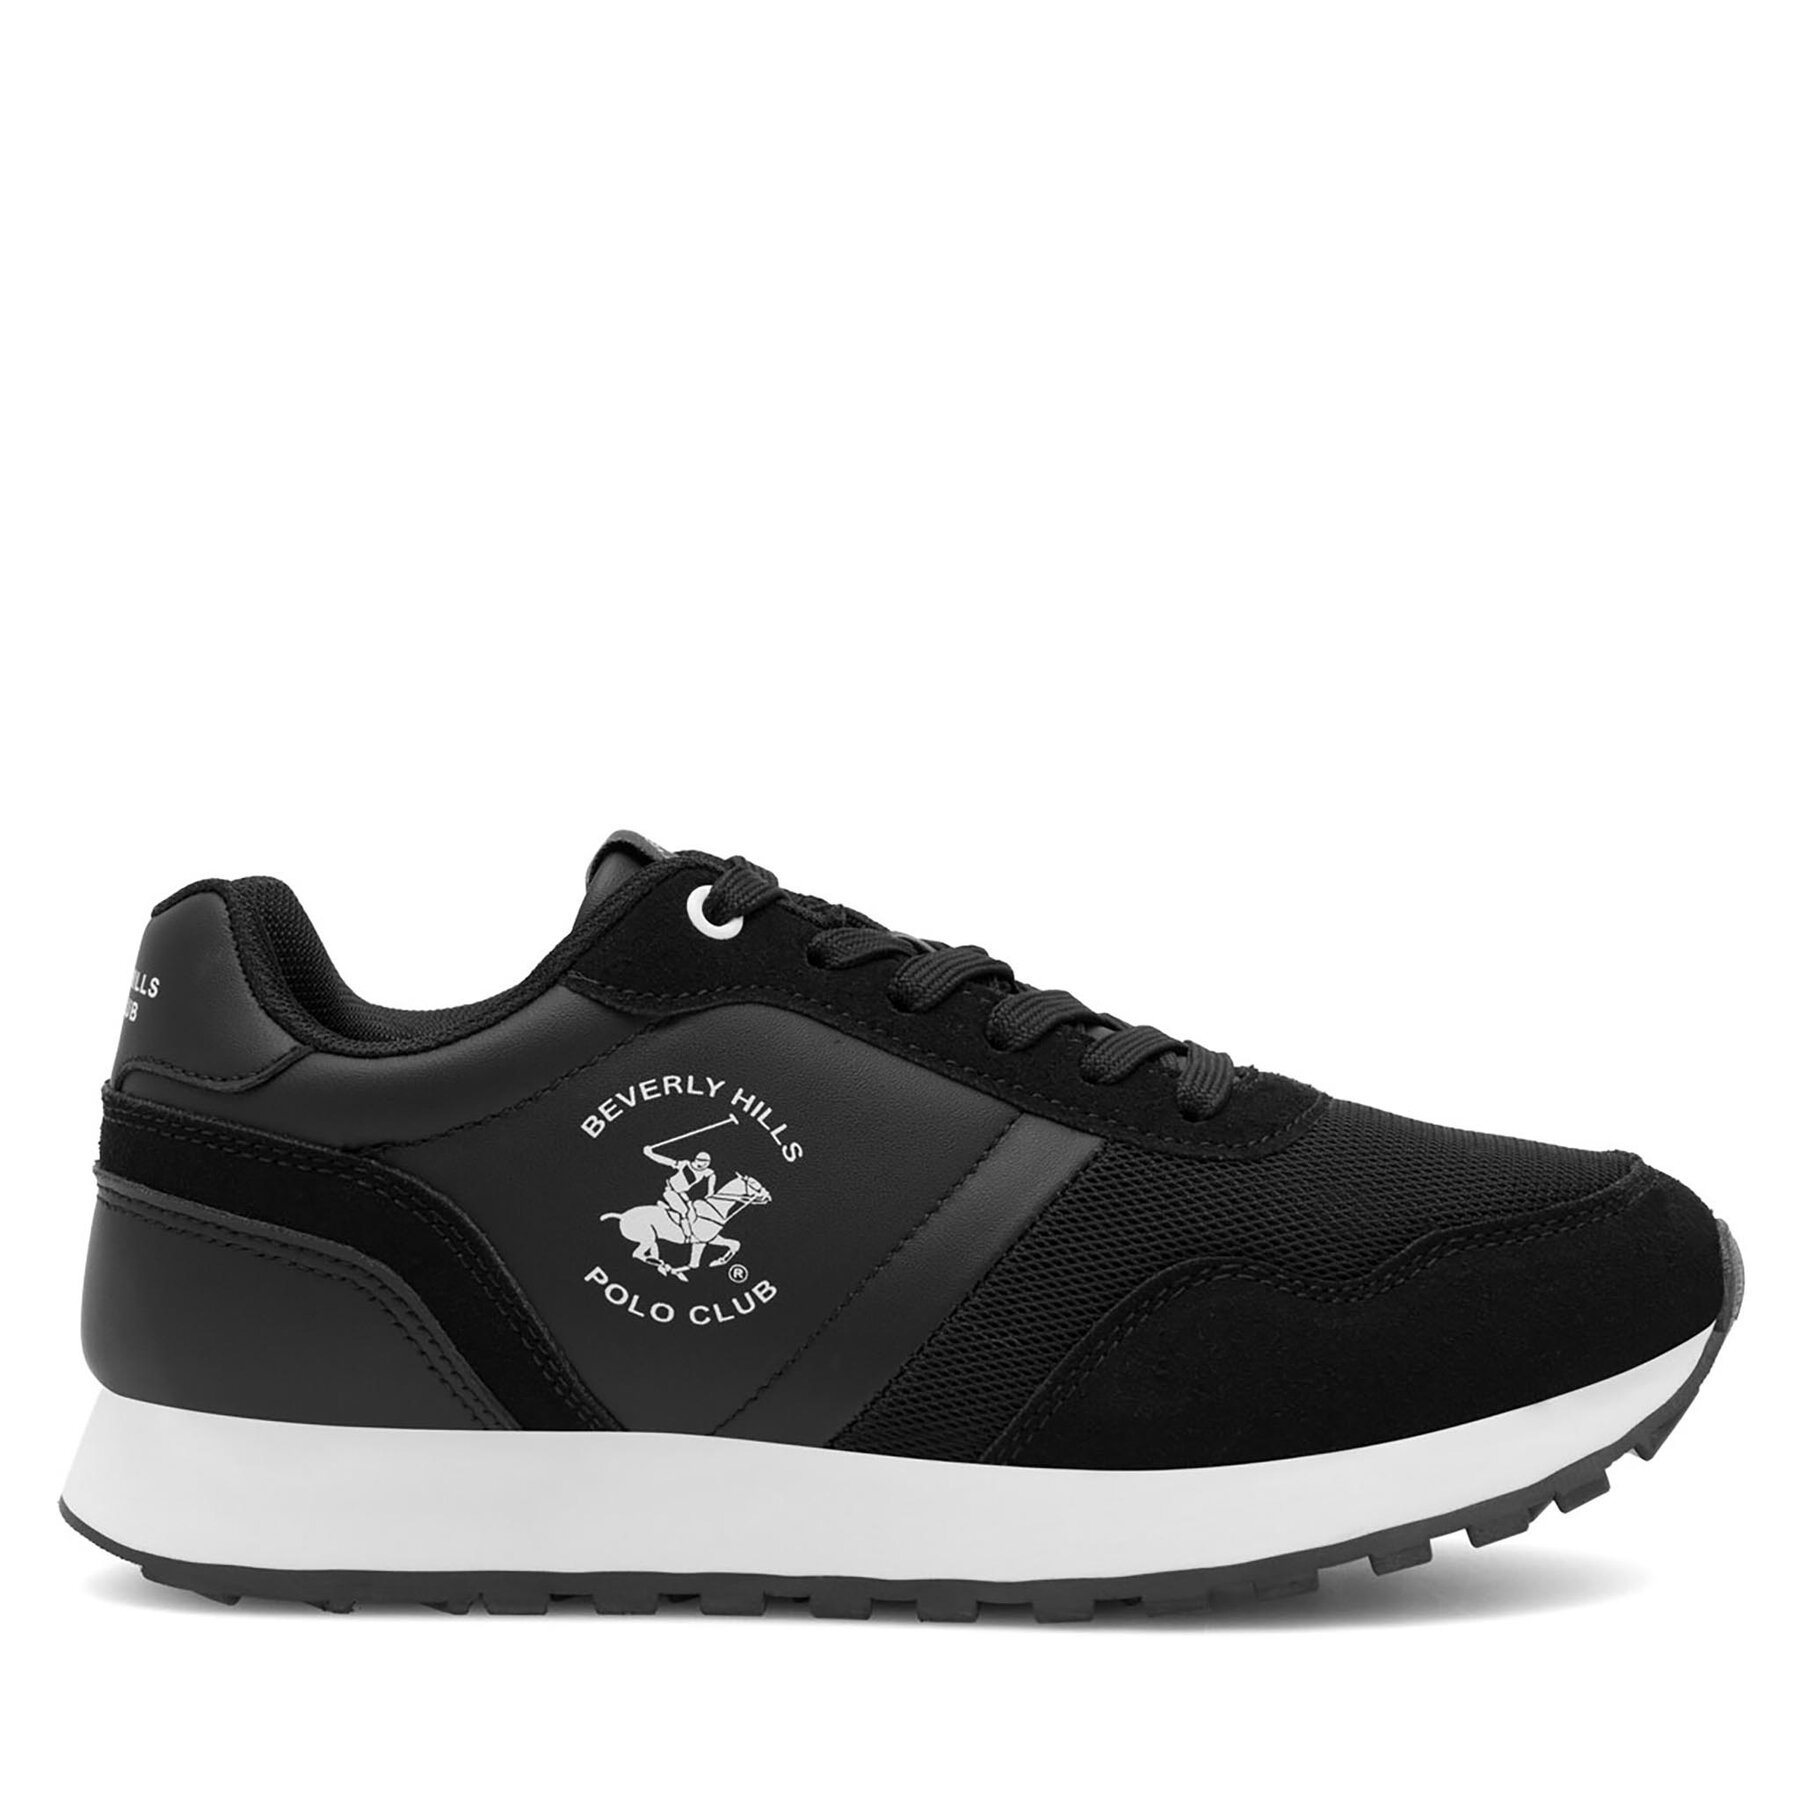 Sneakers Beverly Hills Polo Club SK-08031 Schwarz von Beverly Hills Polo Club